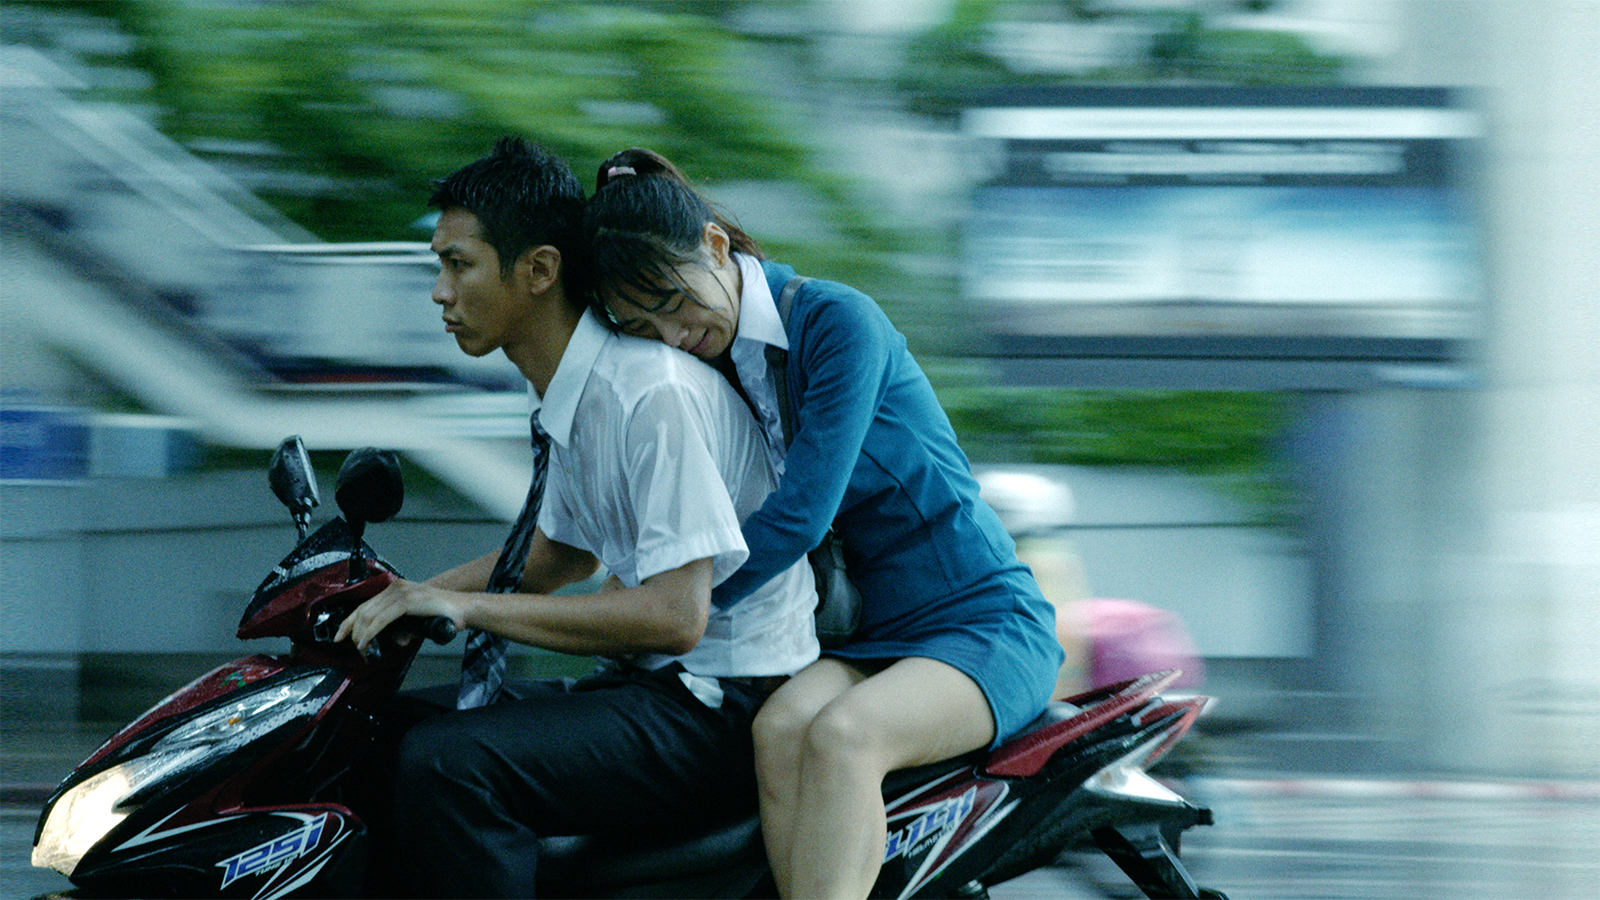 A man and a woman on a motorcycle in motion